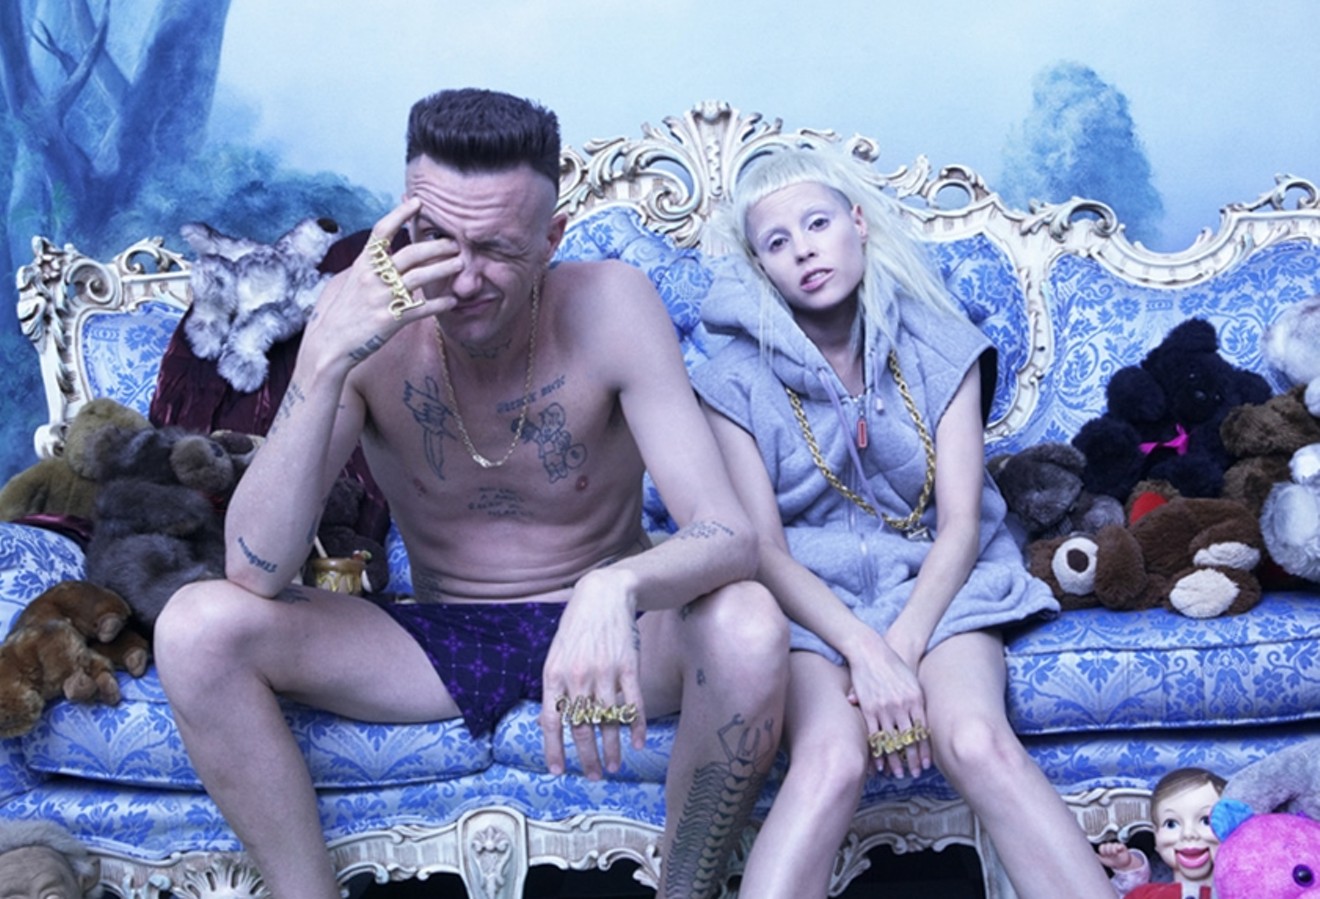 Sorry folks, Ninja and Yolandi Visser probably aren't coming to Phoenix anytime soon.